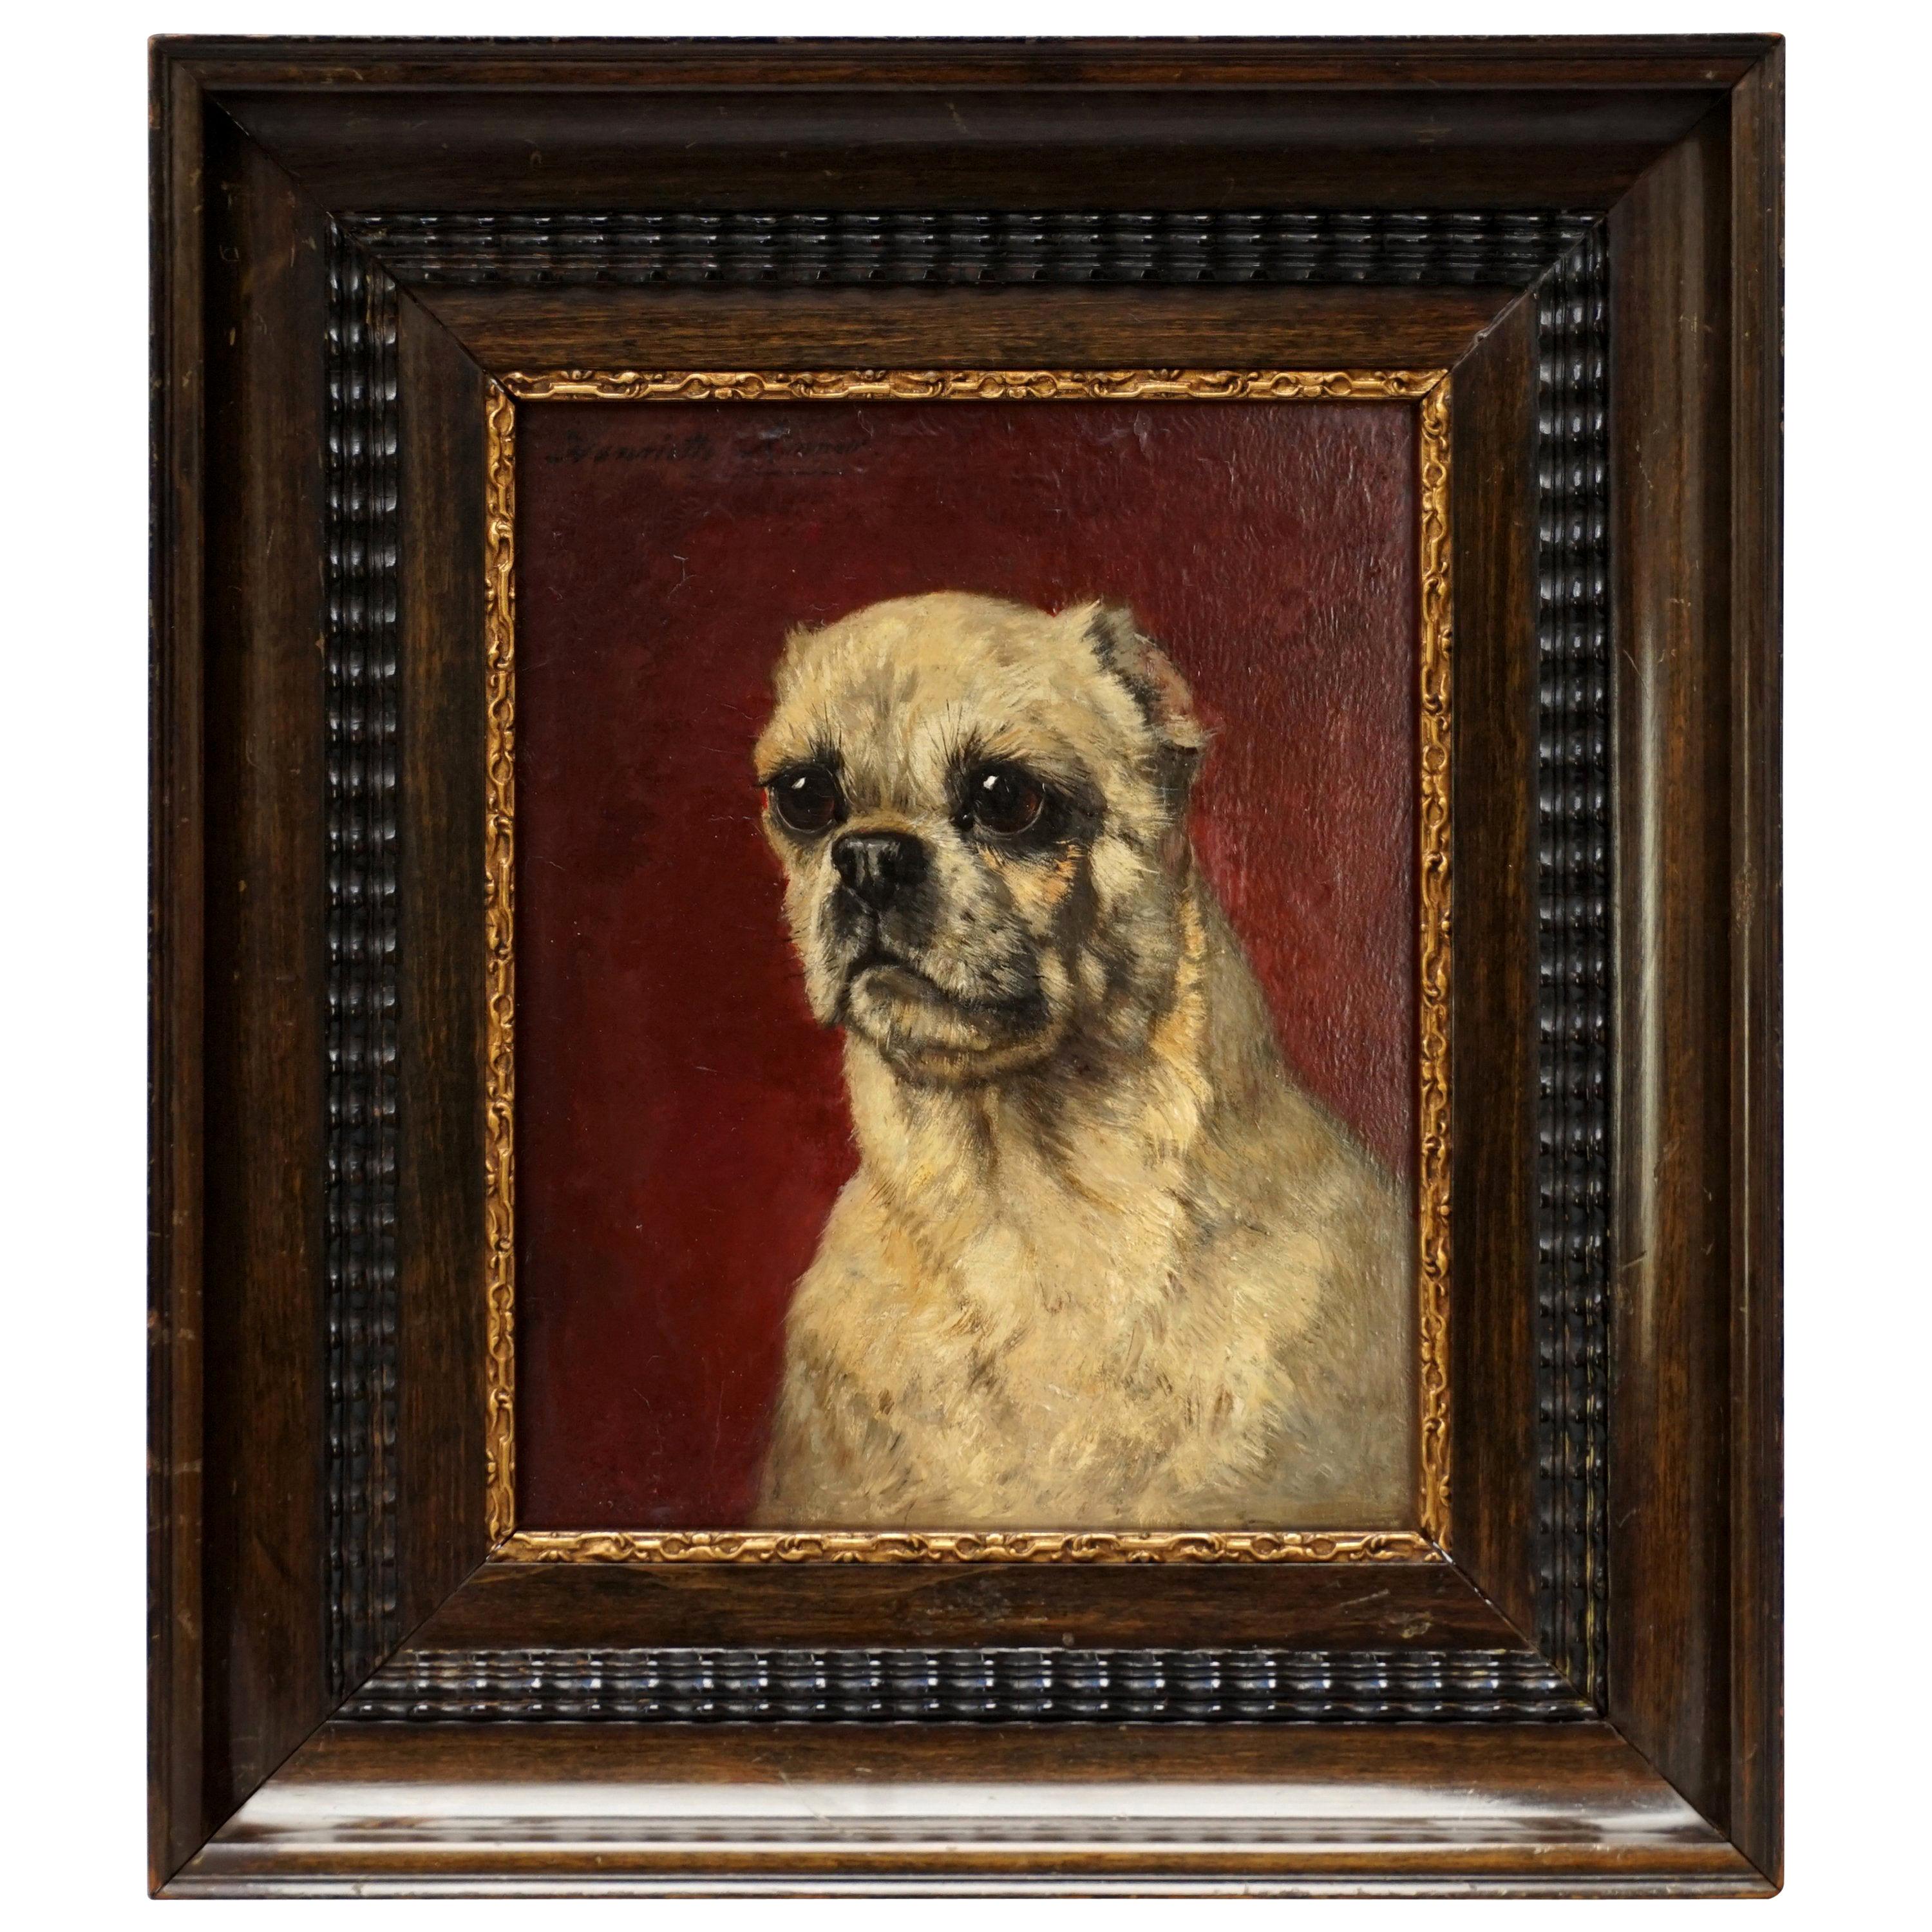 19th Century Oil Painting of a Pug Dog by Henriëtte Ronner Knip on Wooden Panel